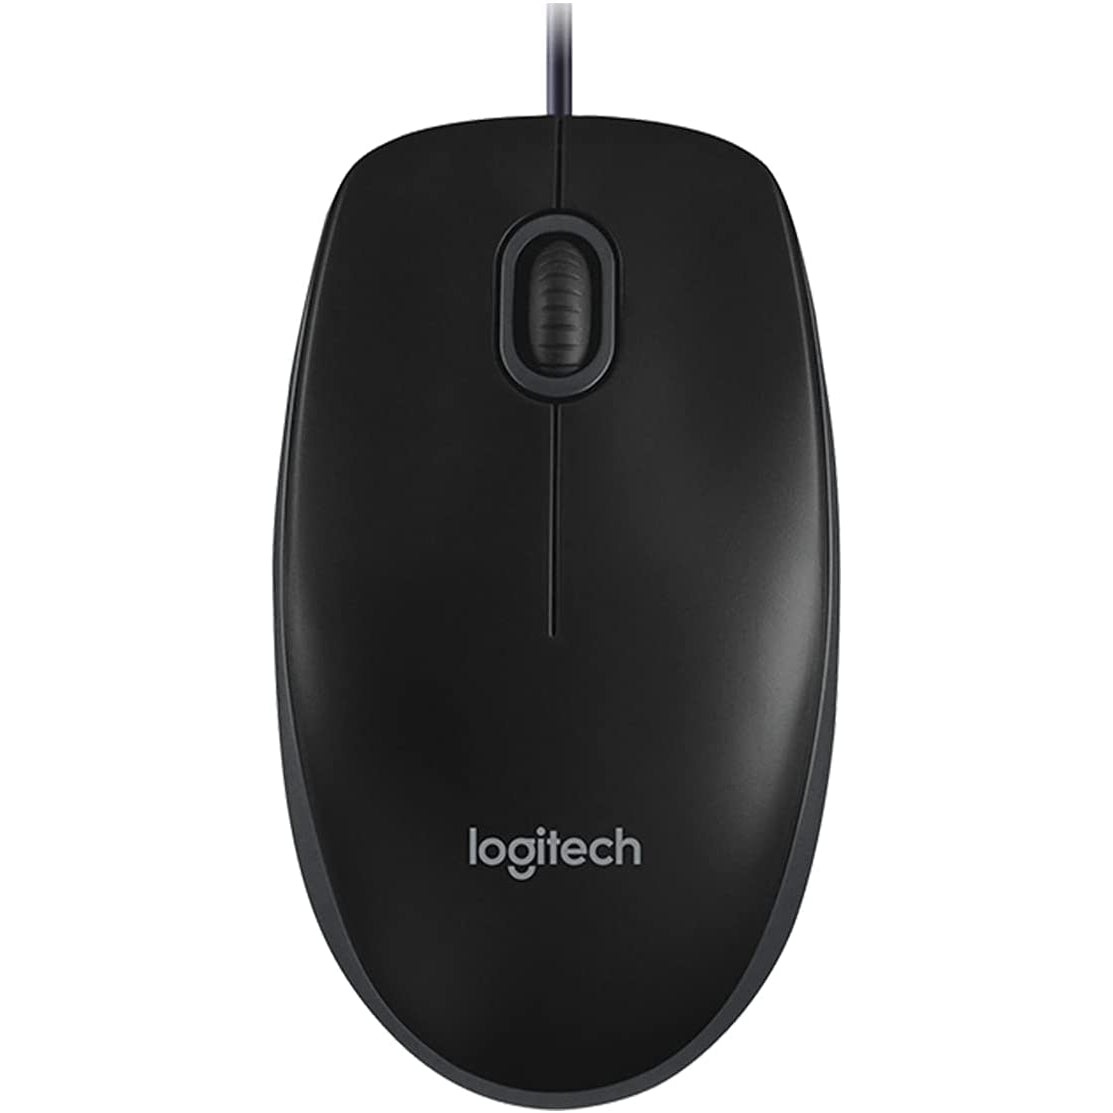 Logitech MK120 Wired Keyboard and Mouse UK Layout - Black